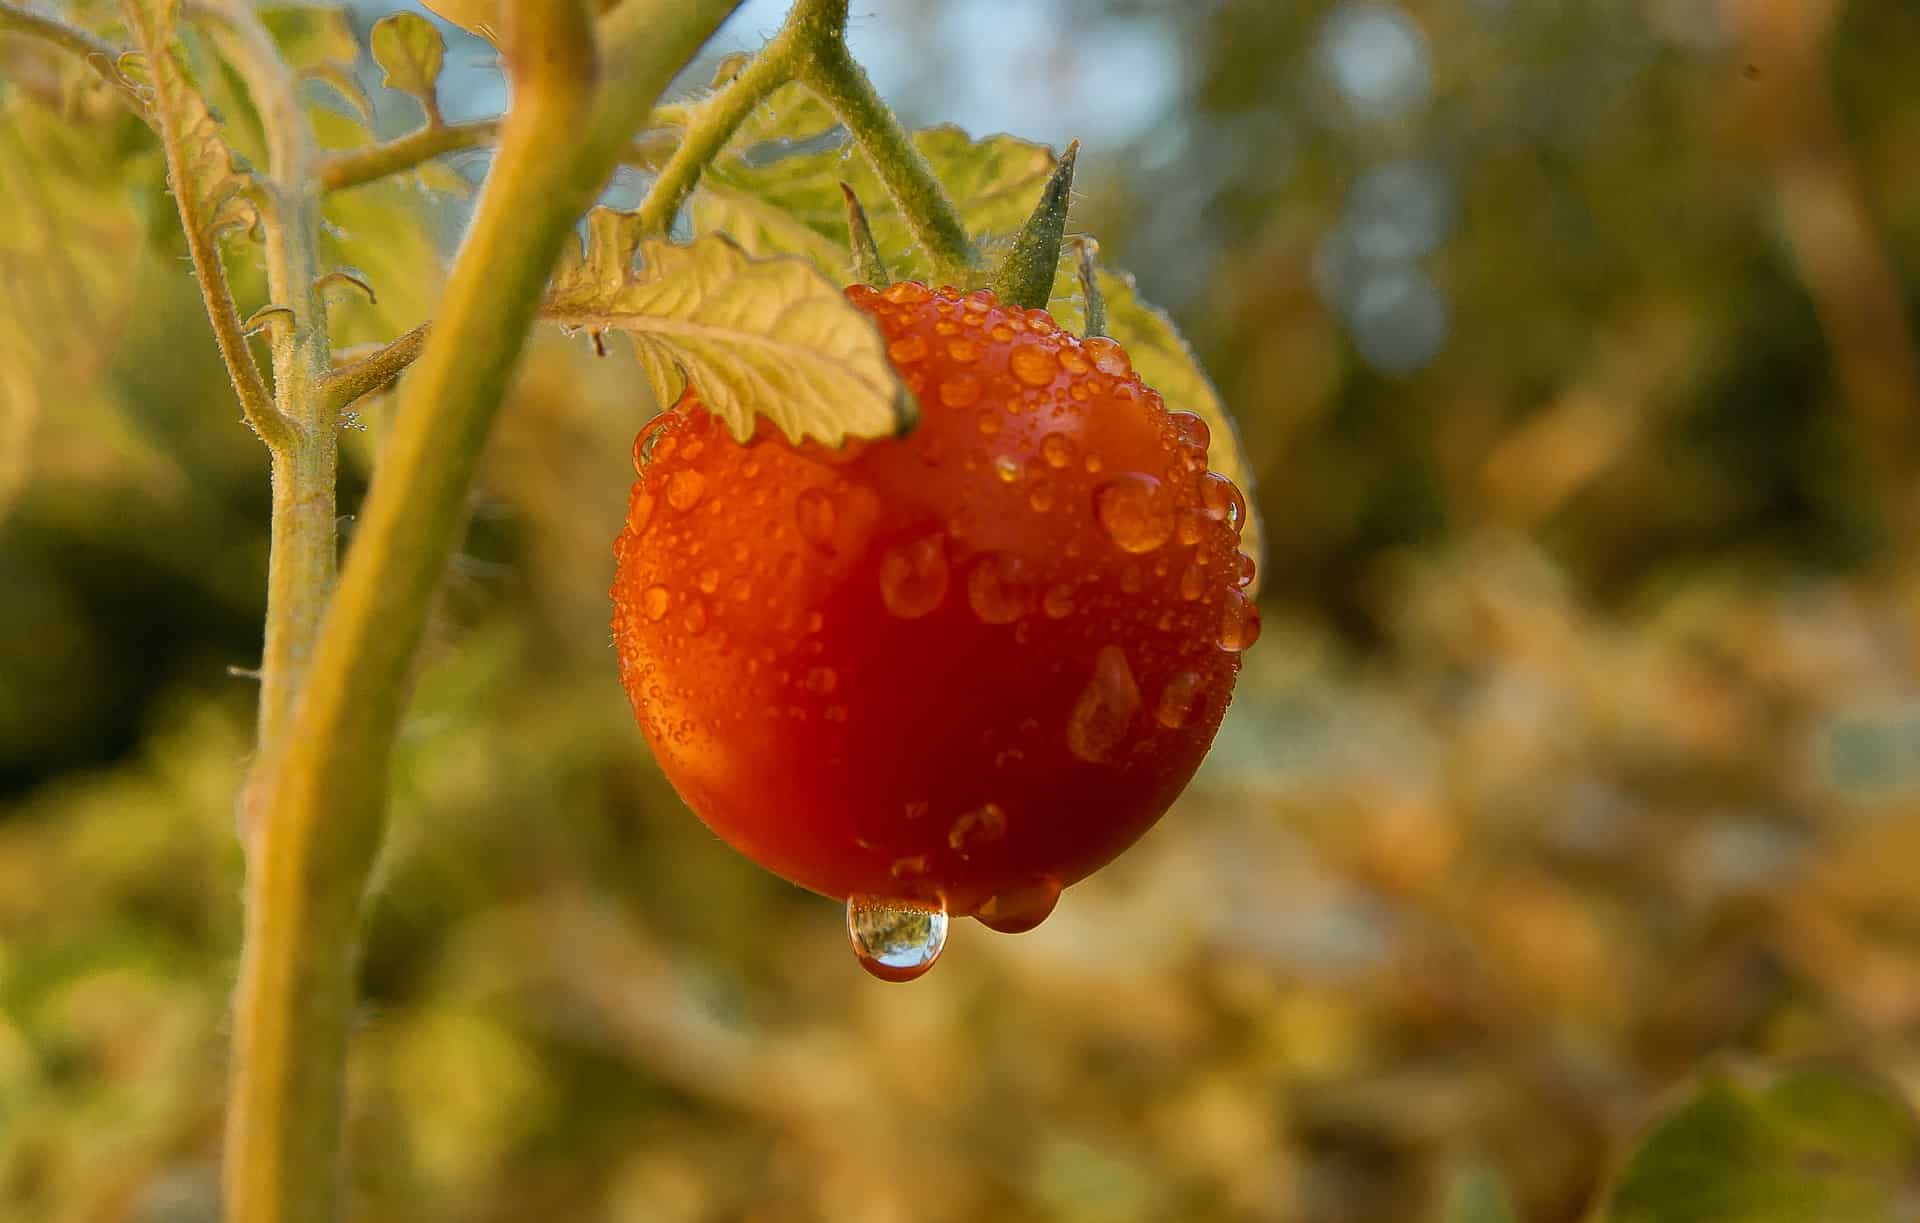 water dripping off ripe tomato on plant